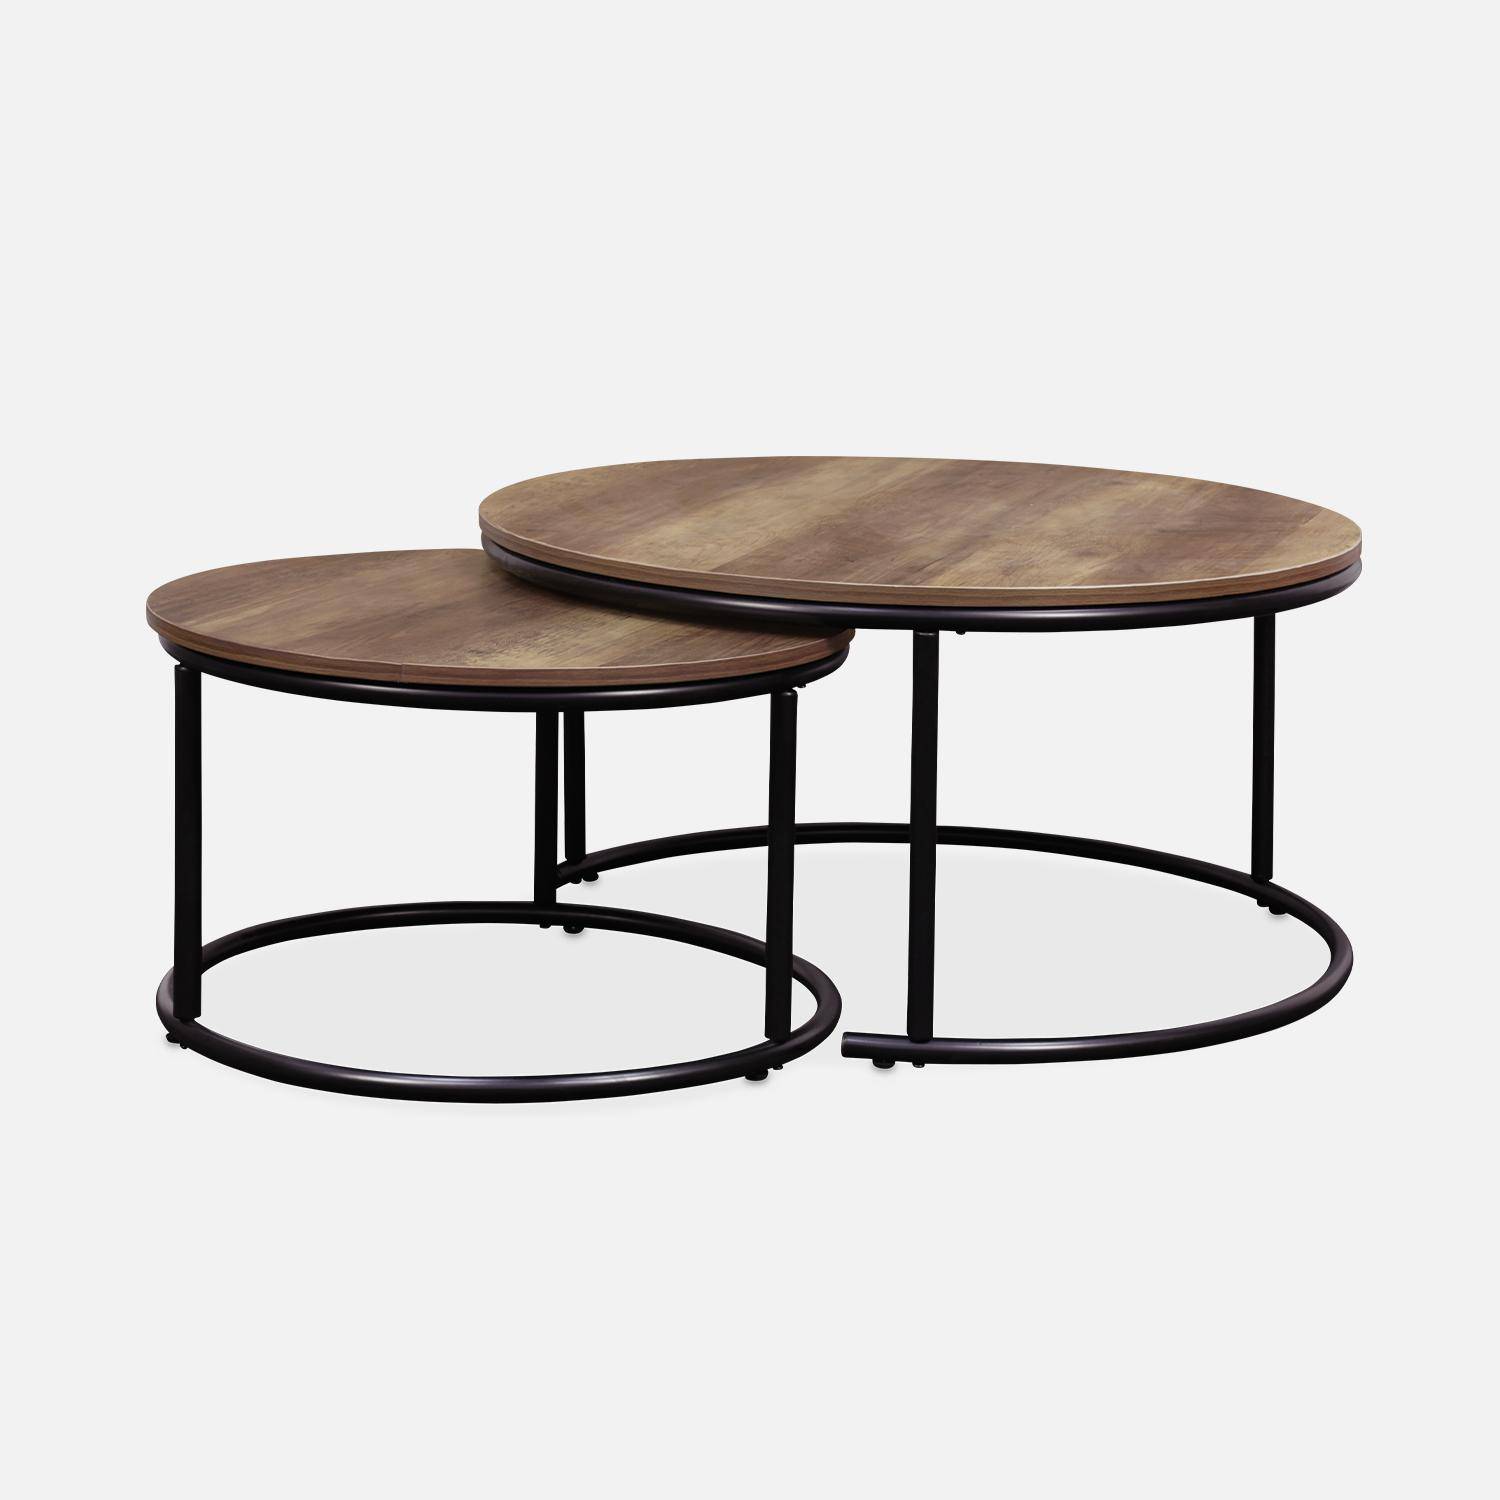 Pair of round, metal and wood-effect nesting coffee tables, 77x40x57cm - Loft,sweeek,Photo4